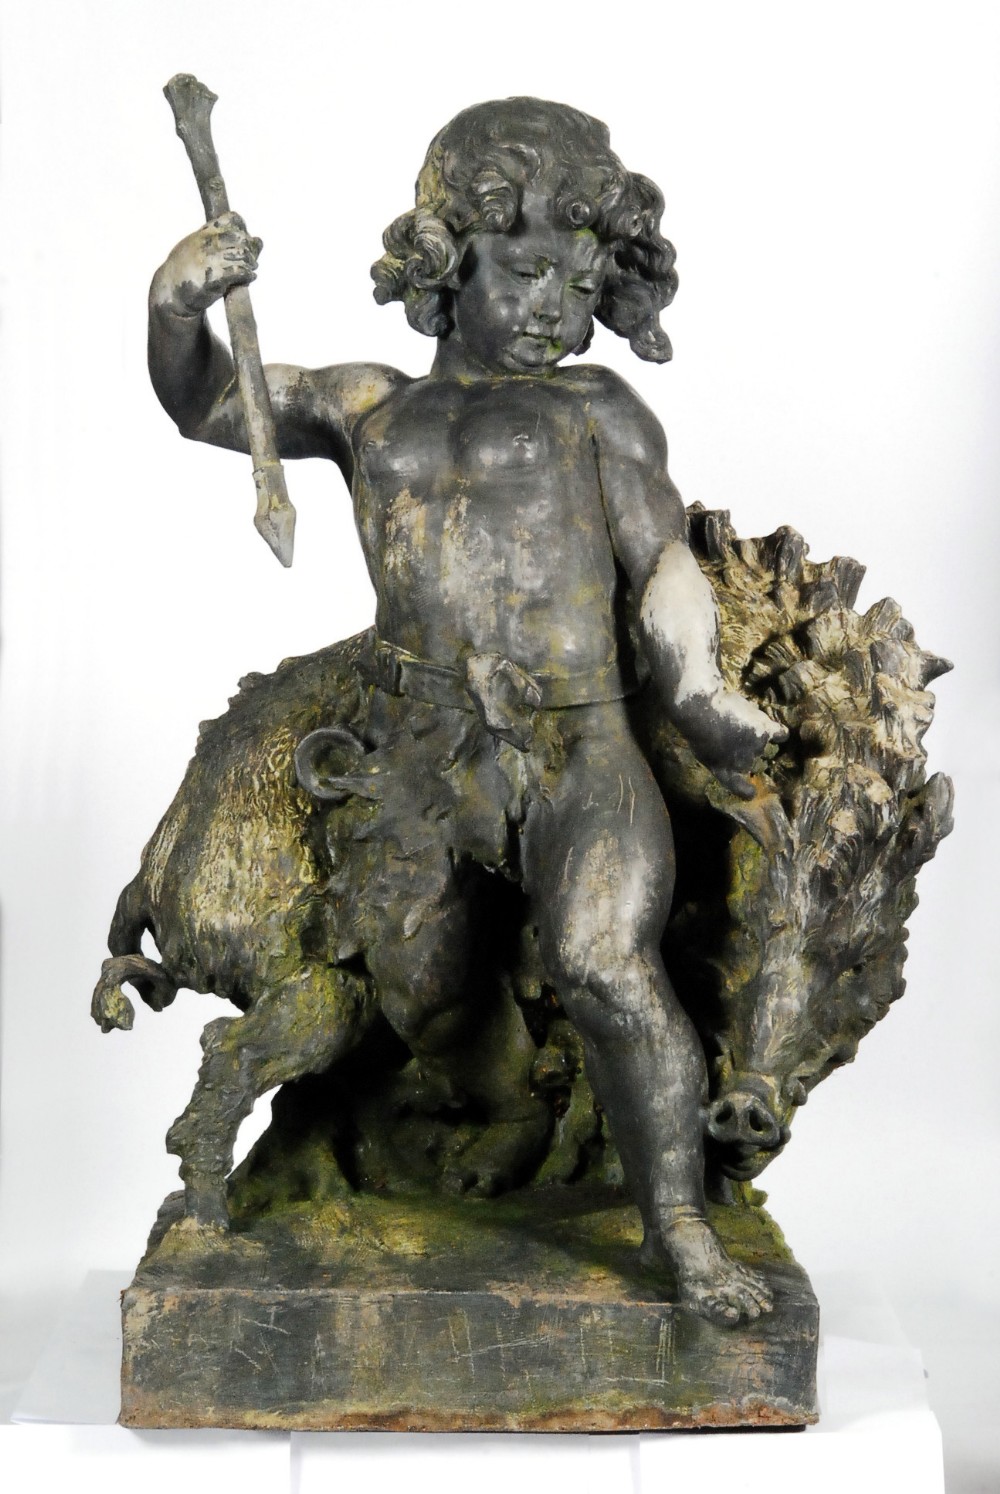 A lead statue by the Bromsgrove Guild - Dryad and Boar, the sculpture depicting a hunter attacking a